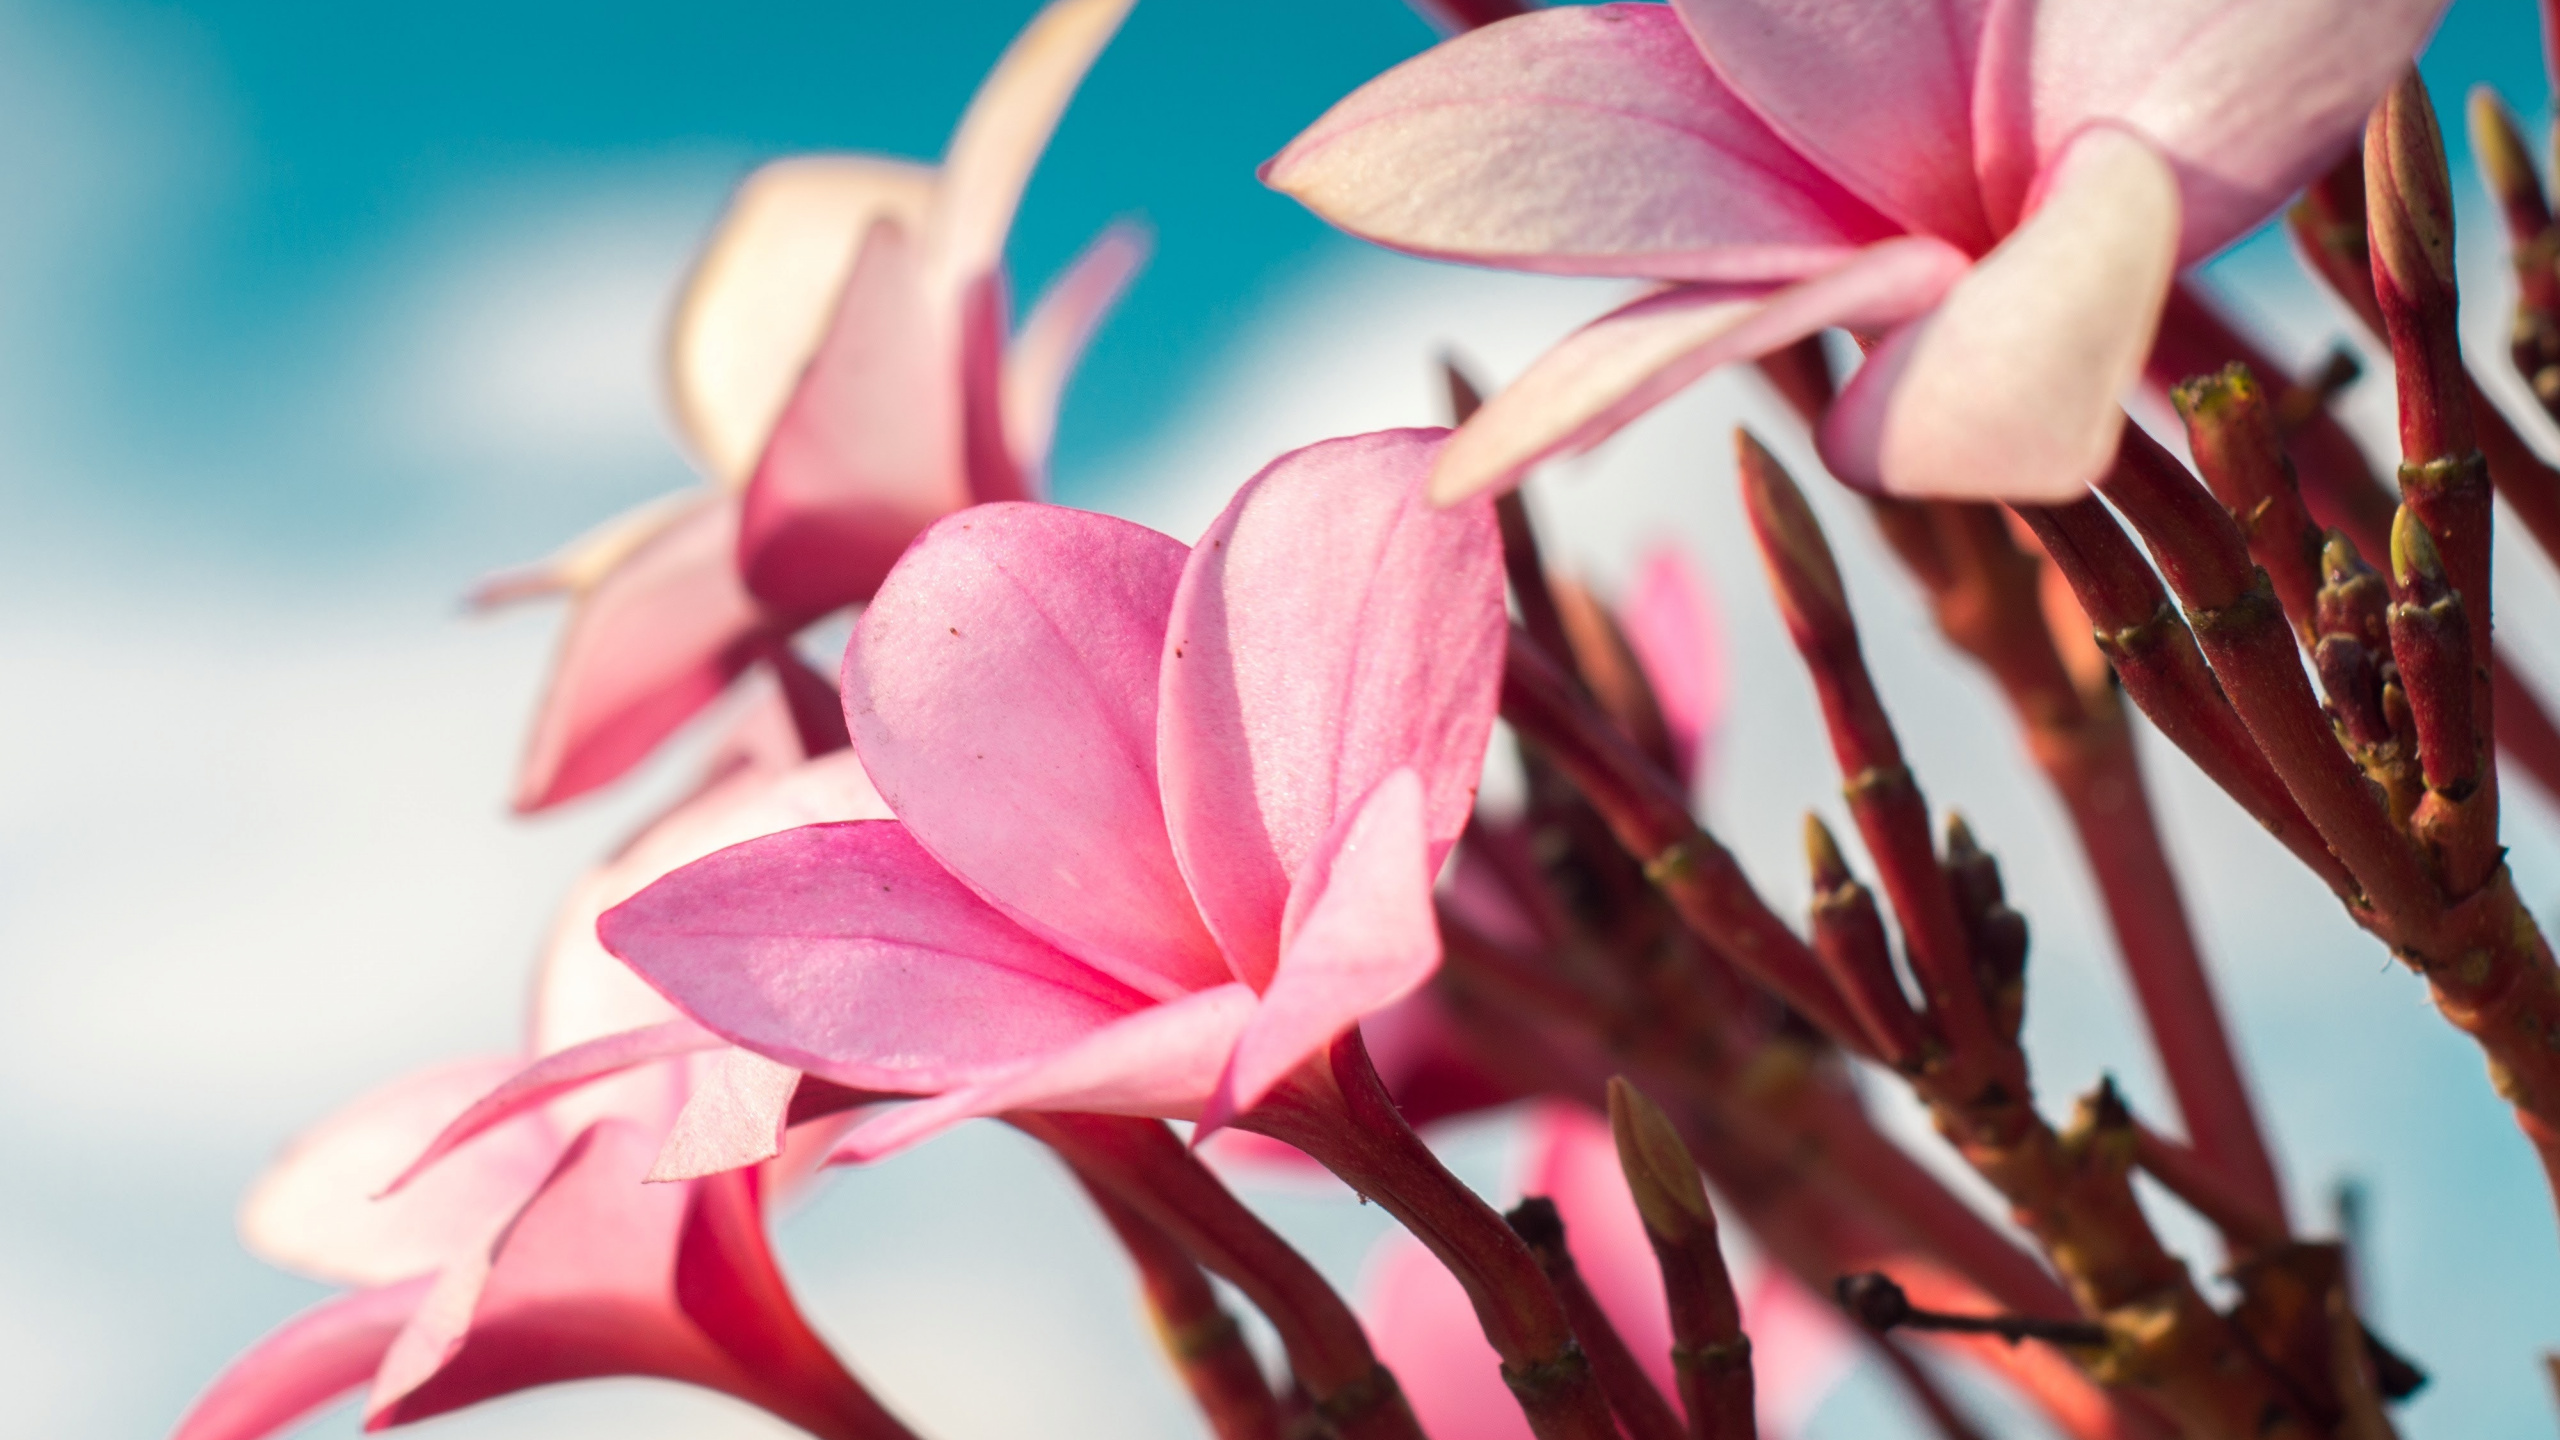 Pink and White Flower in Close up Photography. Wallpaper in 2560x1440 Resolution